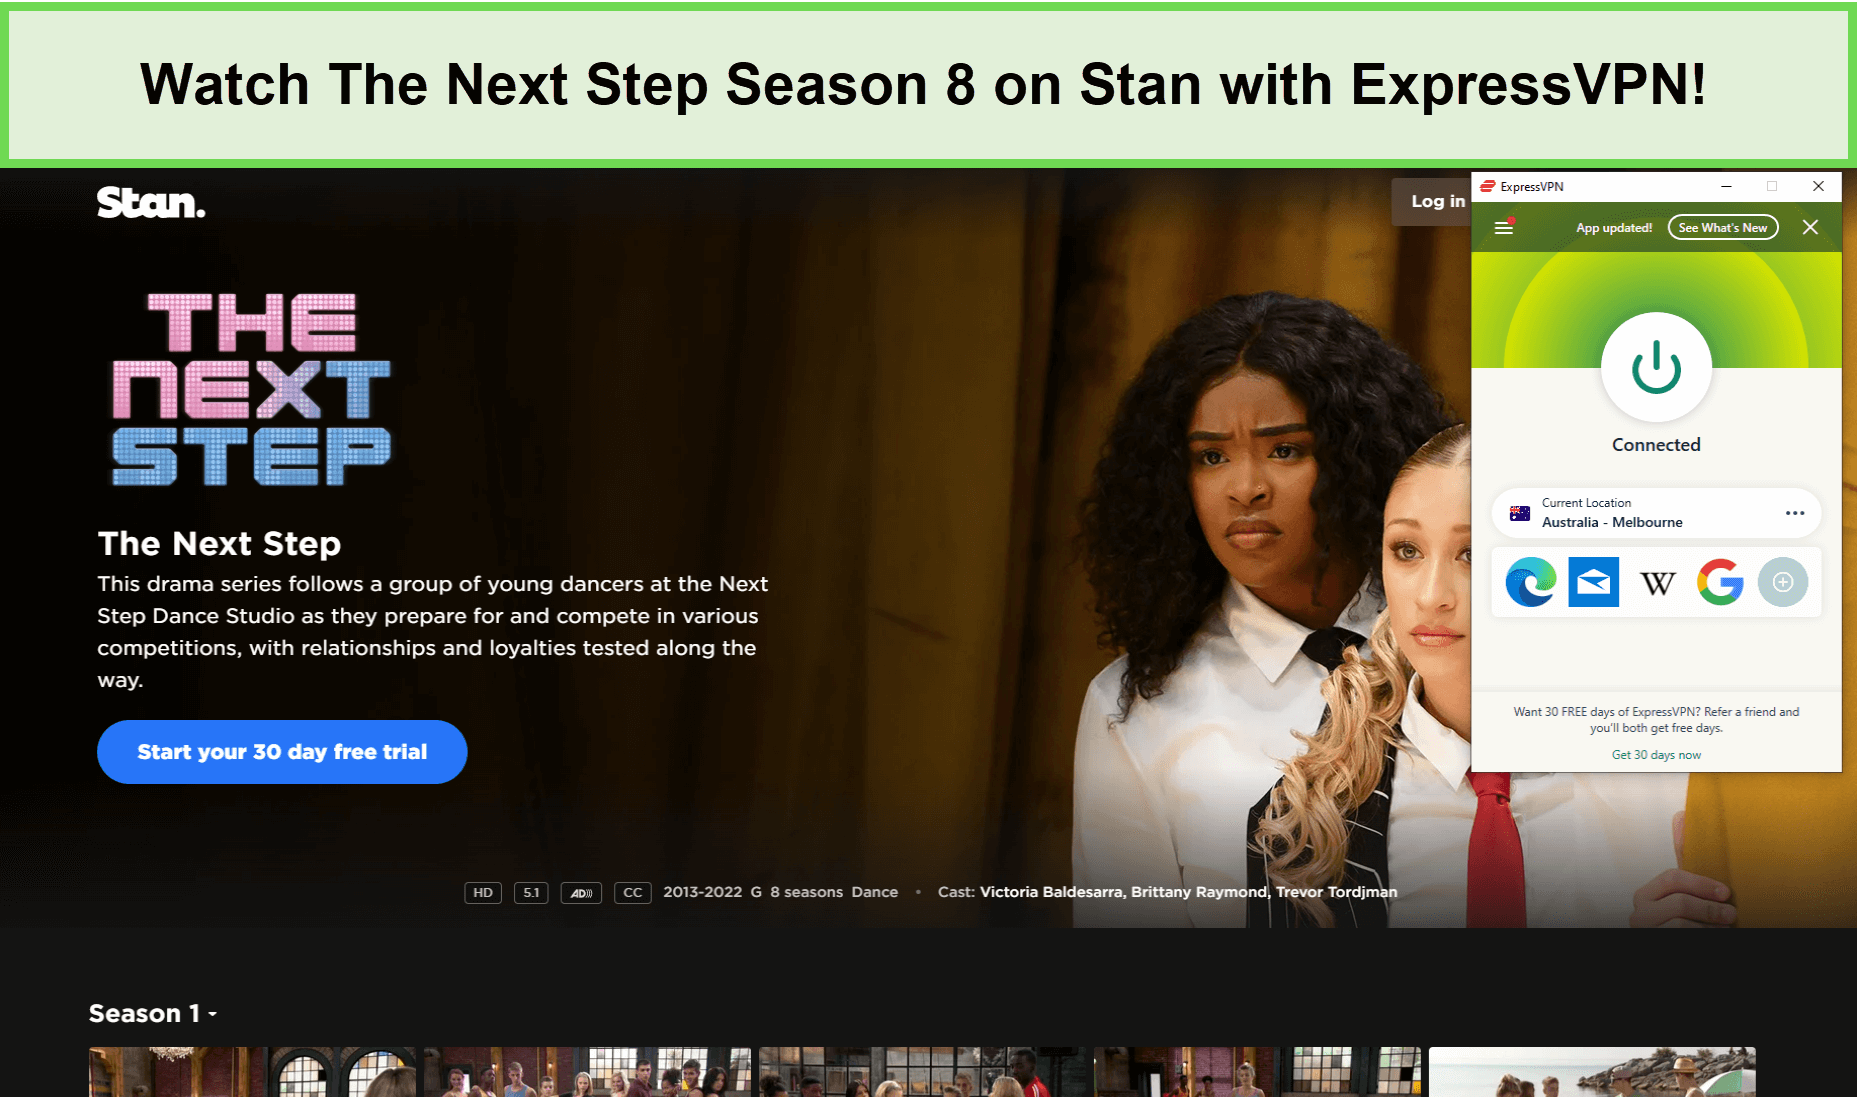 Watch-The-Next-Step-Season-8-in-Germany-on-Stan-with-ExpressVPN